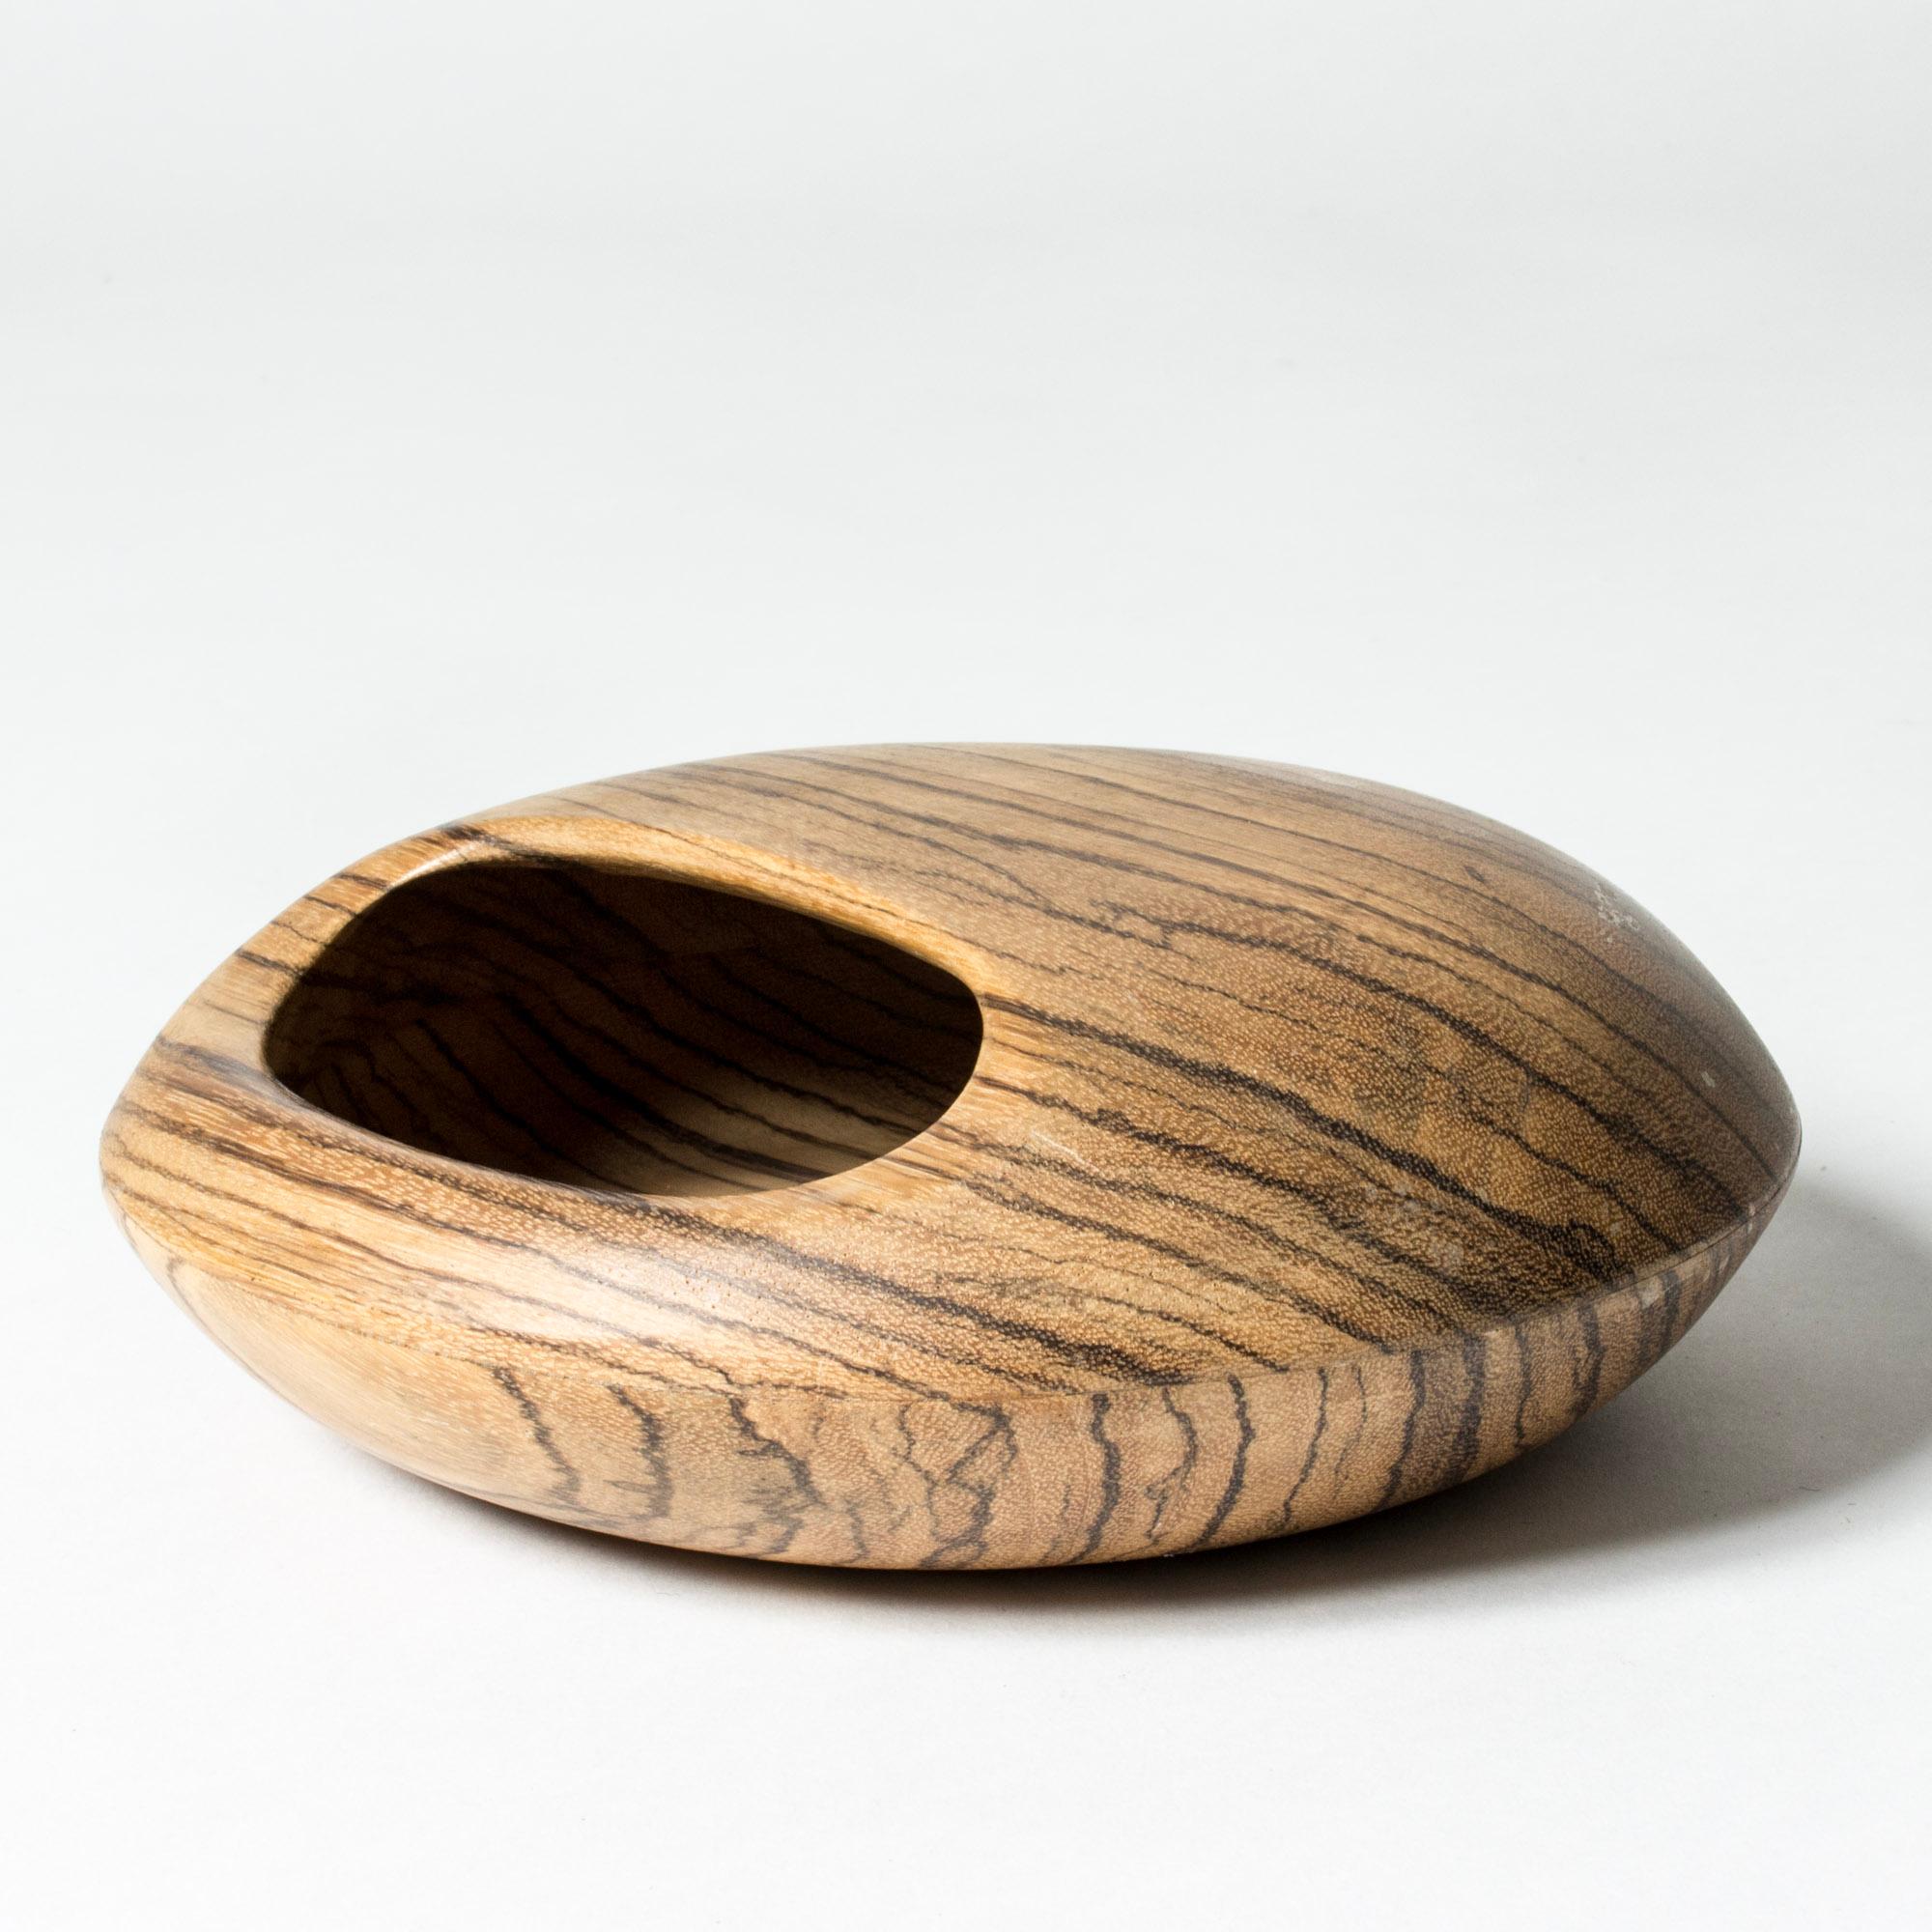 Striking wenge “nut cache” bowl by Sigvard Nilsson, in a convex, smooth round form with an oval opening. Very decorative and sculptural.